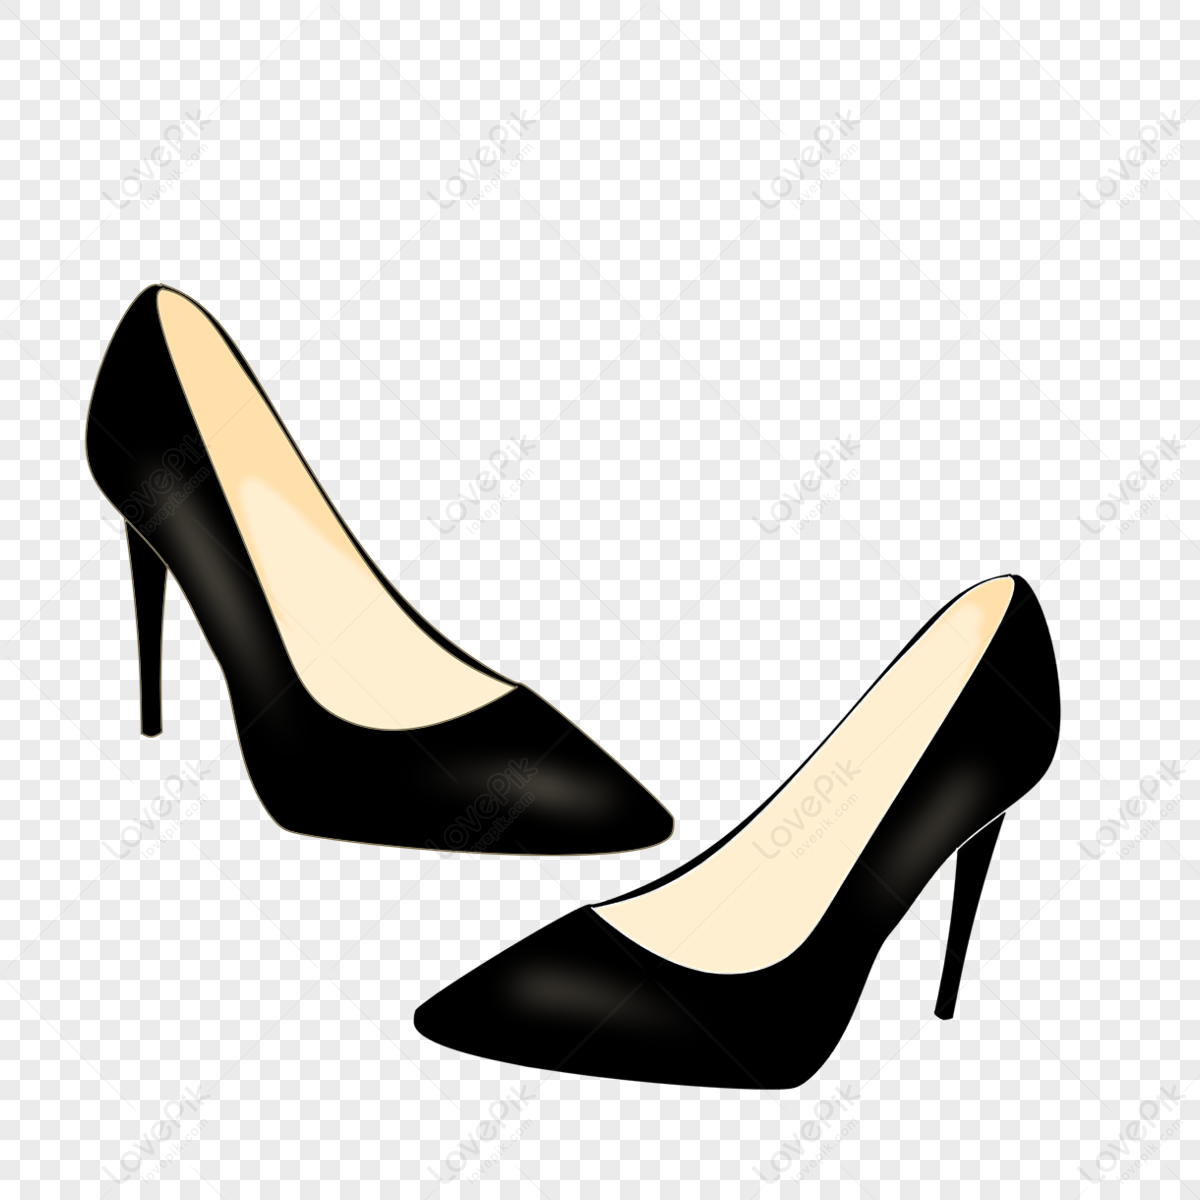 Doodle Women Shoes Icon Isolated On White Outline Kids Hand Drawing Art  Line Sketch Vector Stock Ilustration Stock Illustration - Download Image  Now - iStock